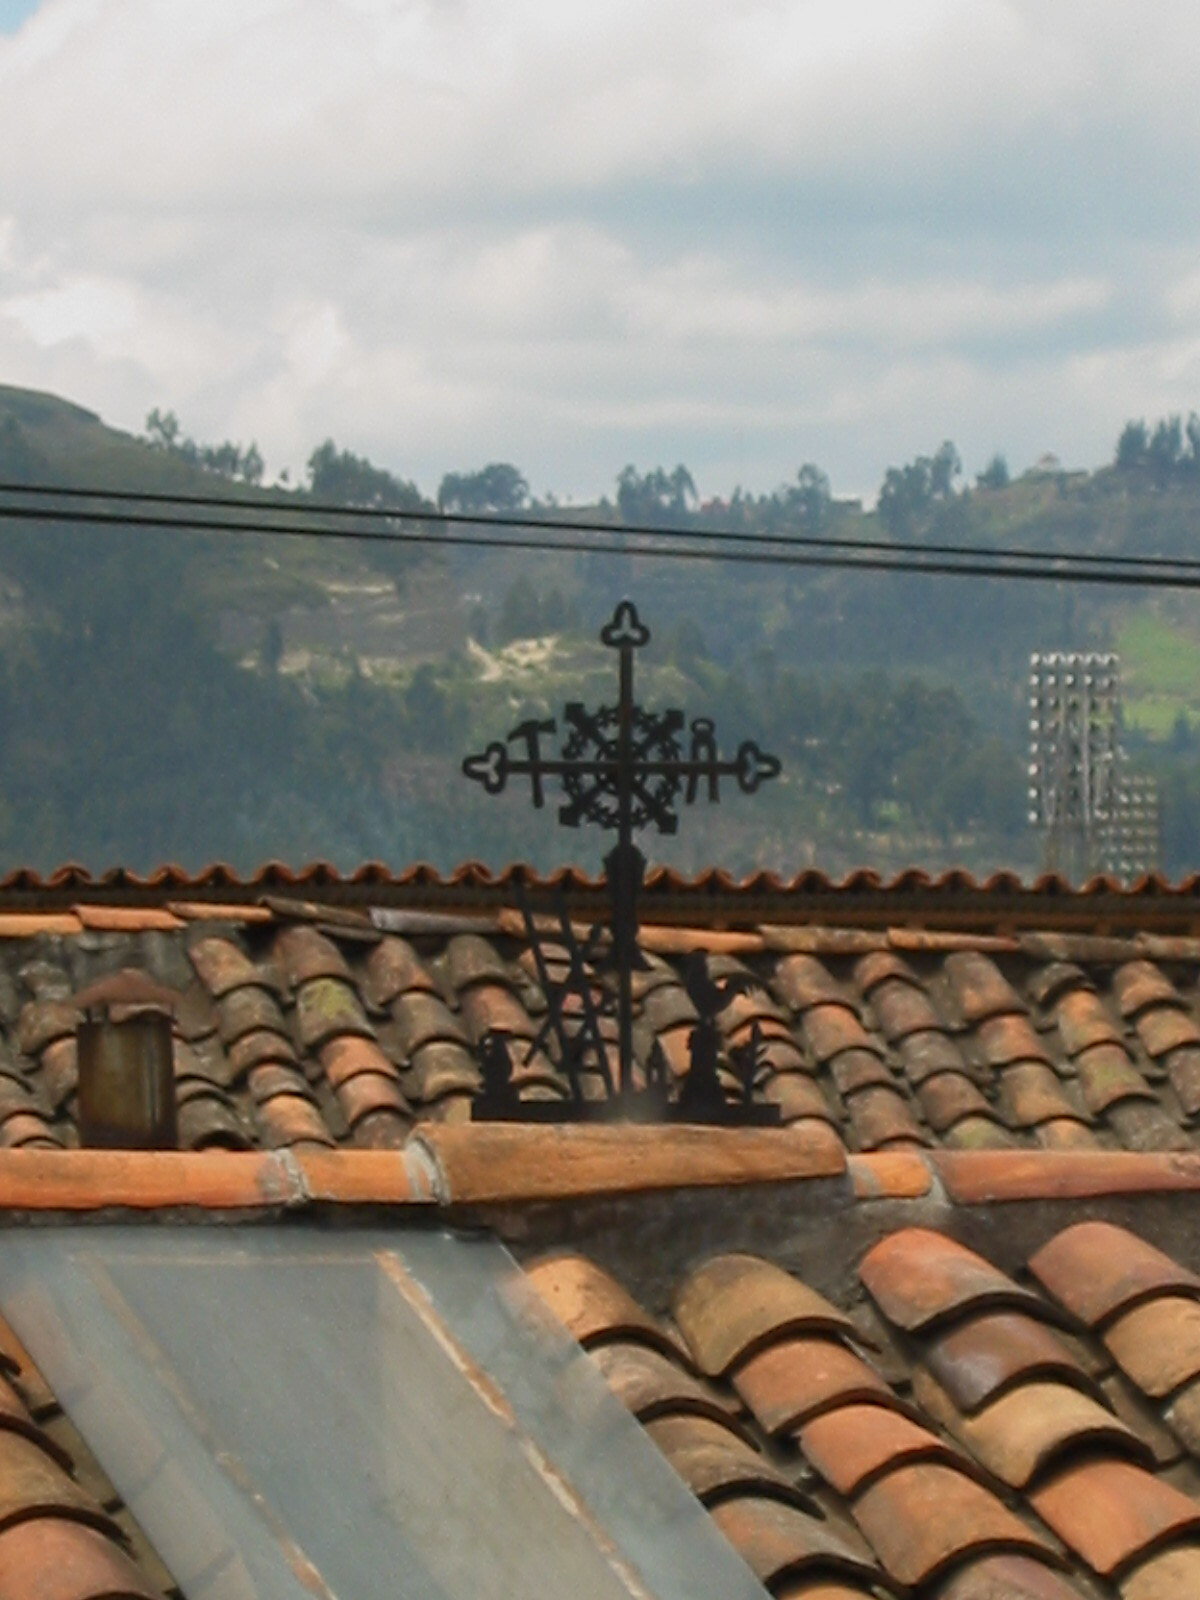 Black wrought iron crosses decorated each red clay rooftop.